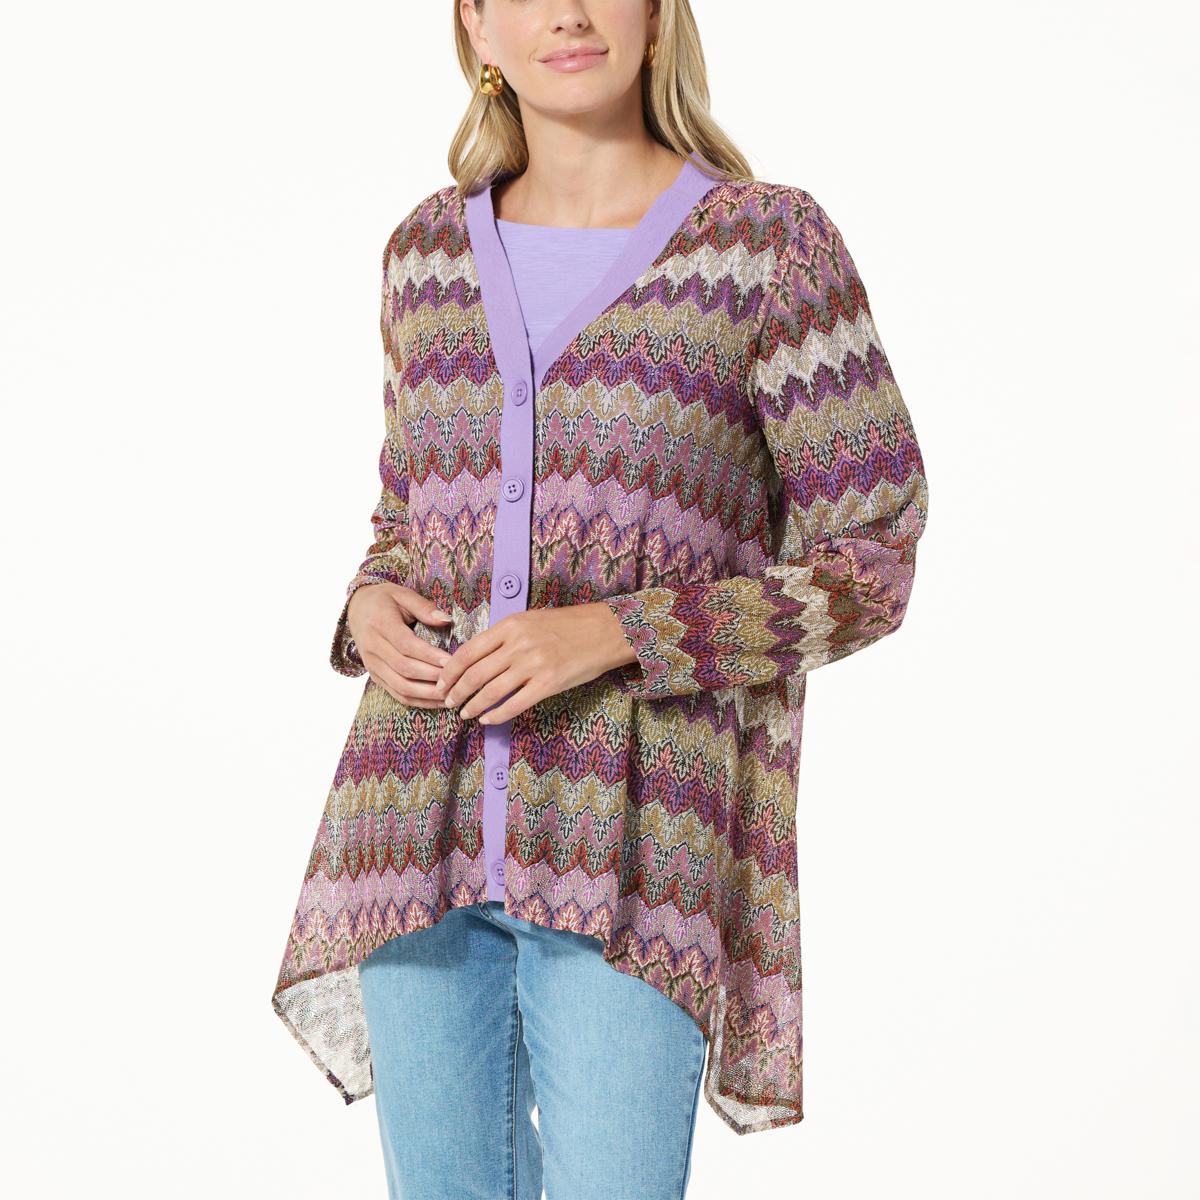 DG2 by Diane Gilman Striped French Terry Waterfall Cardigan